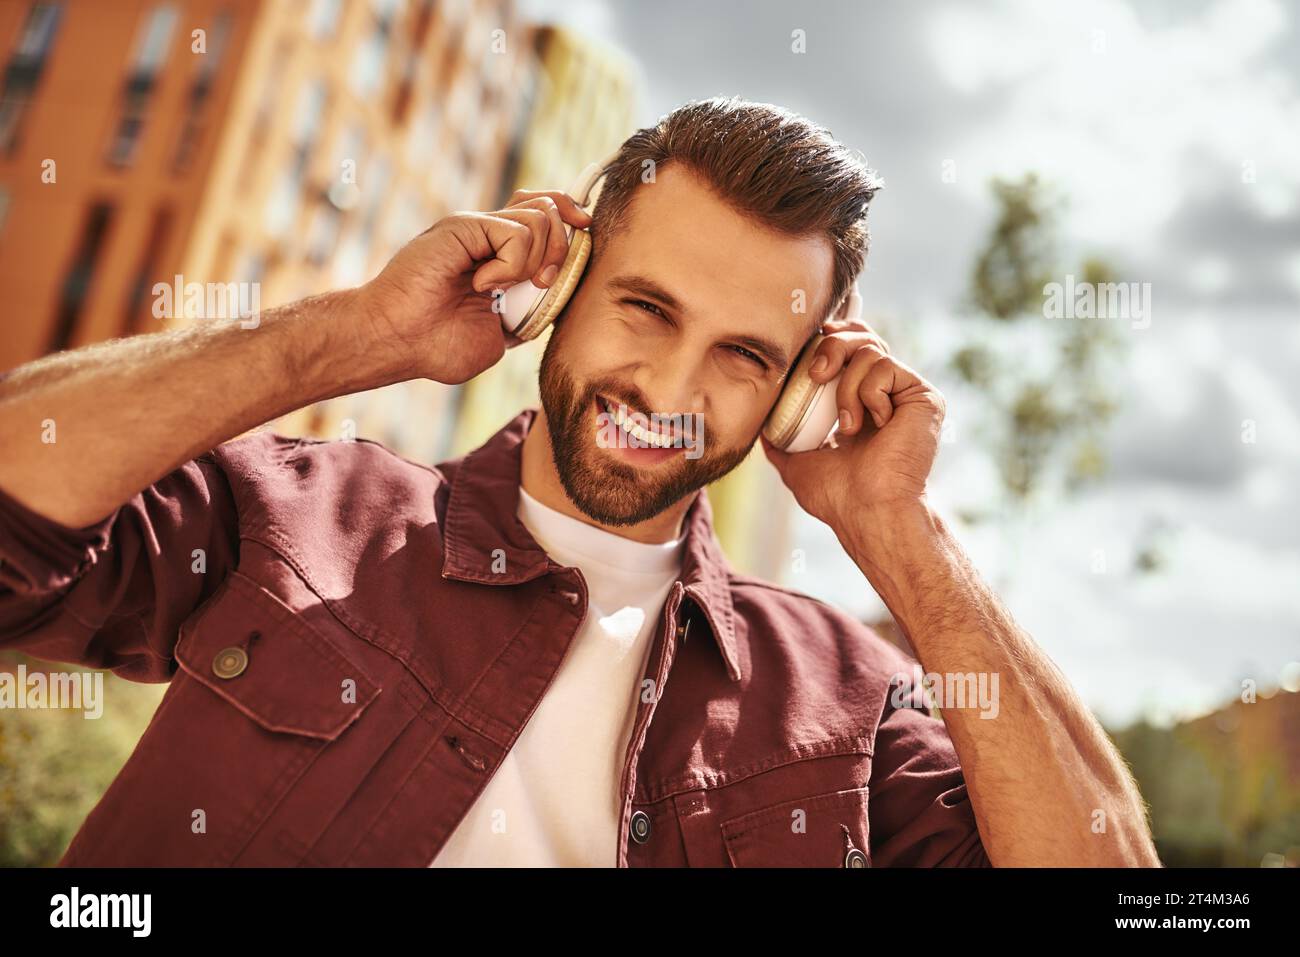 Can't live without music. Handsome and happy young man with stubble in headphones listening to the music and smiling while standing on the street Stock Photo